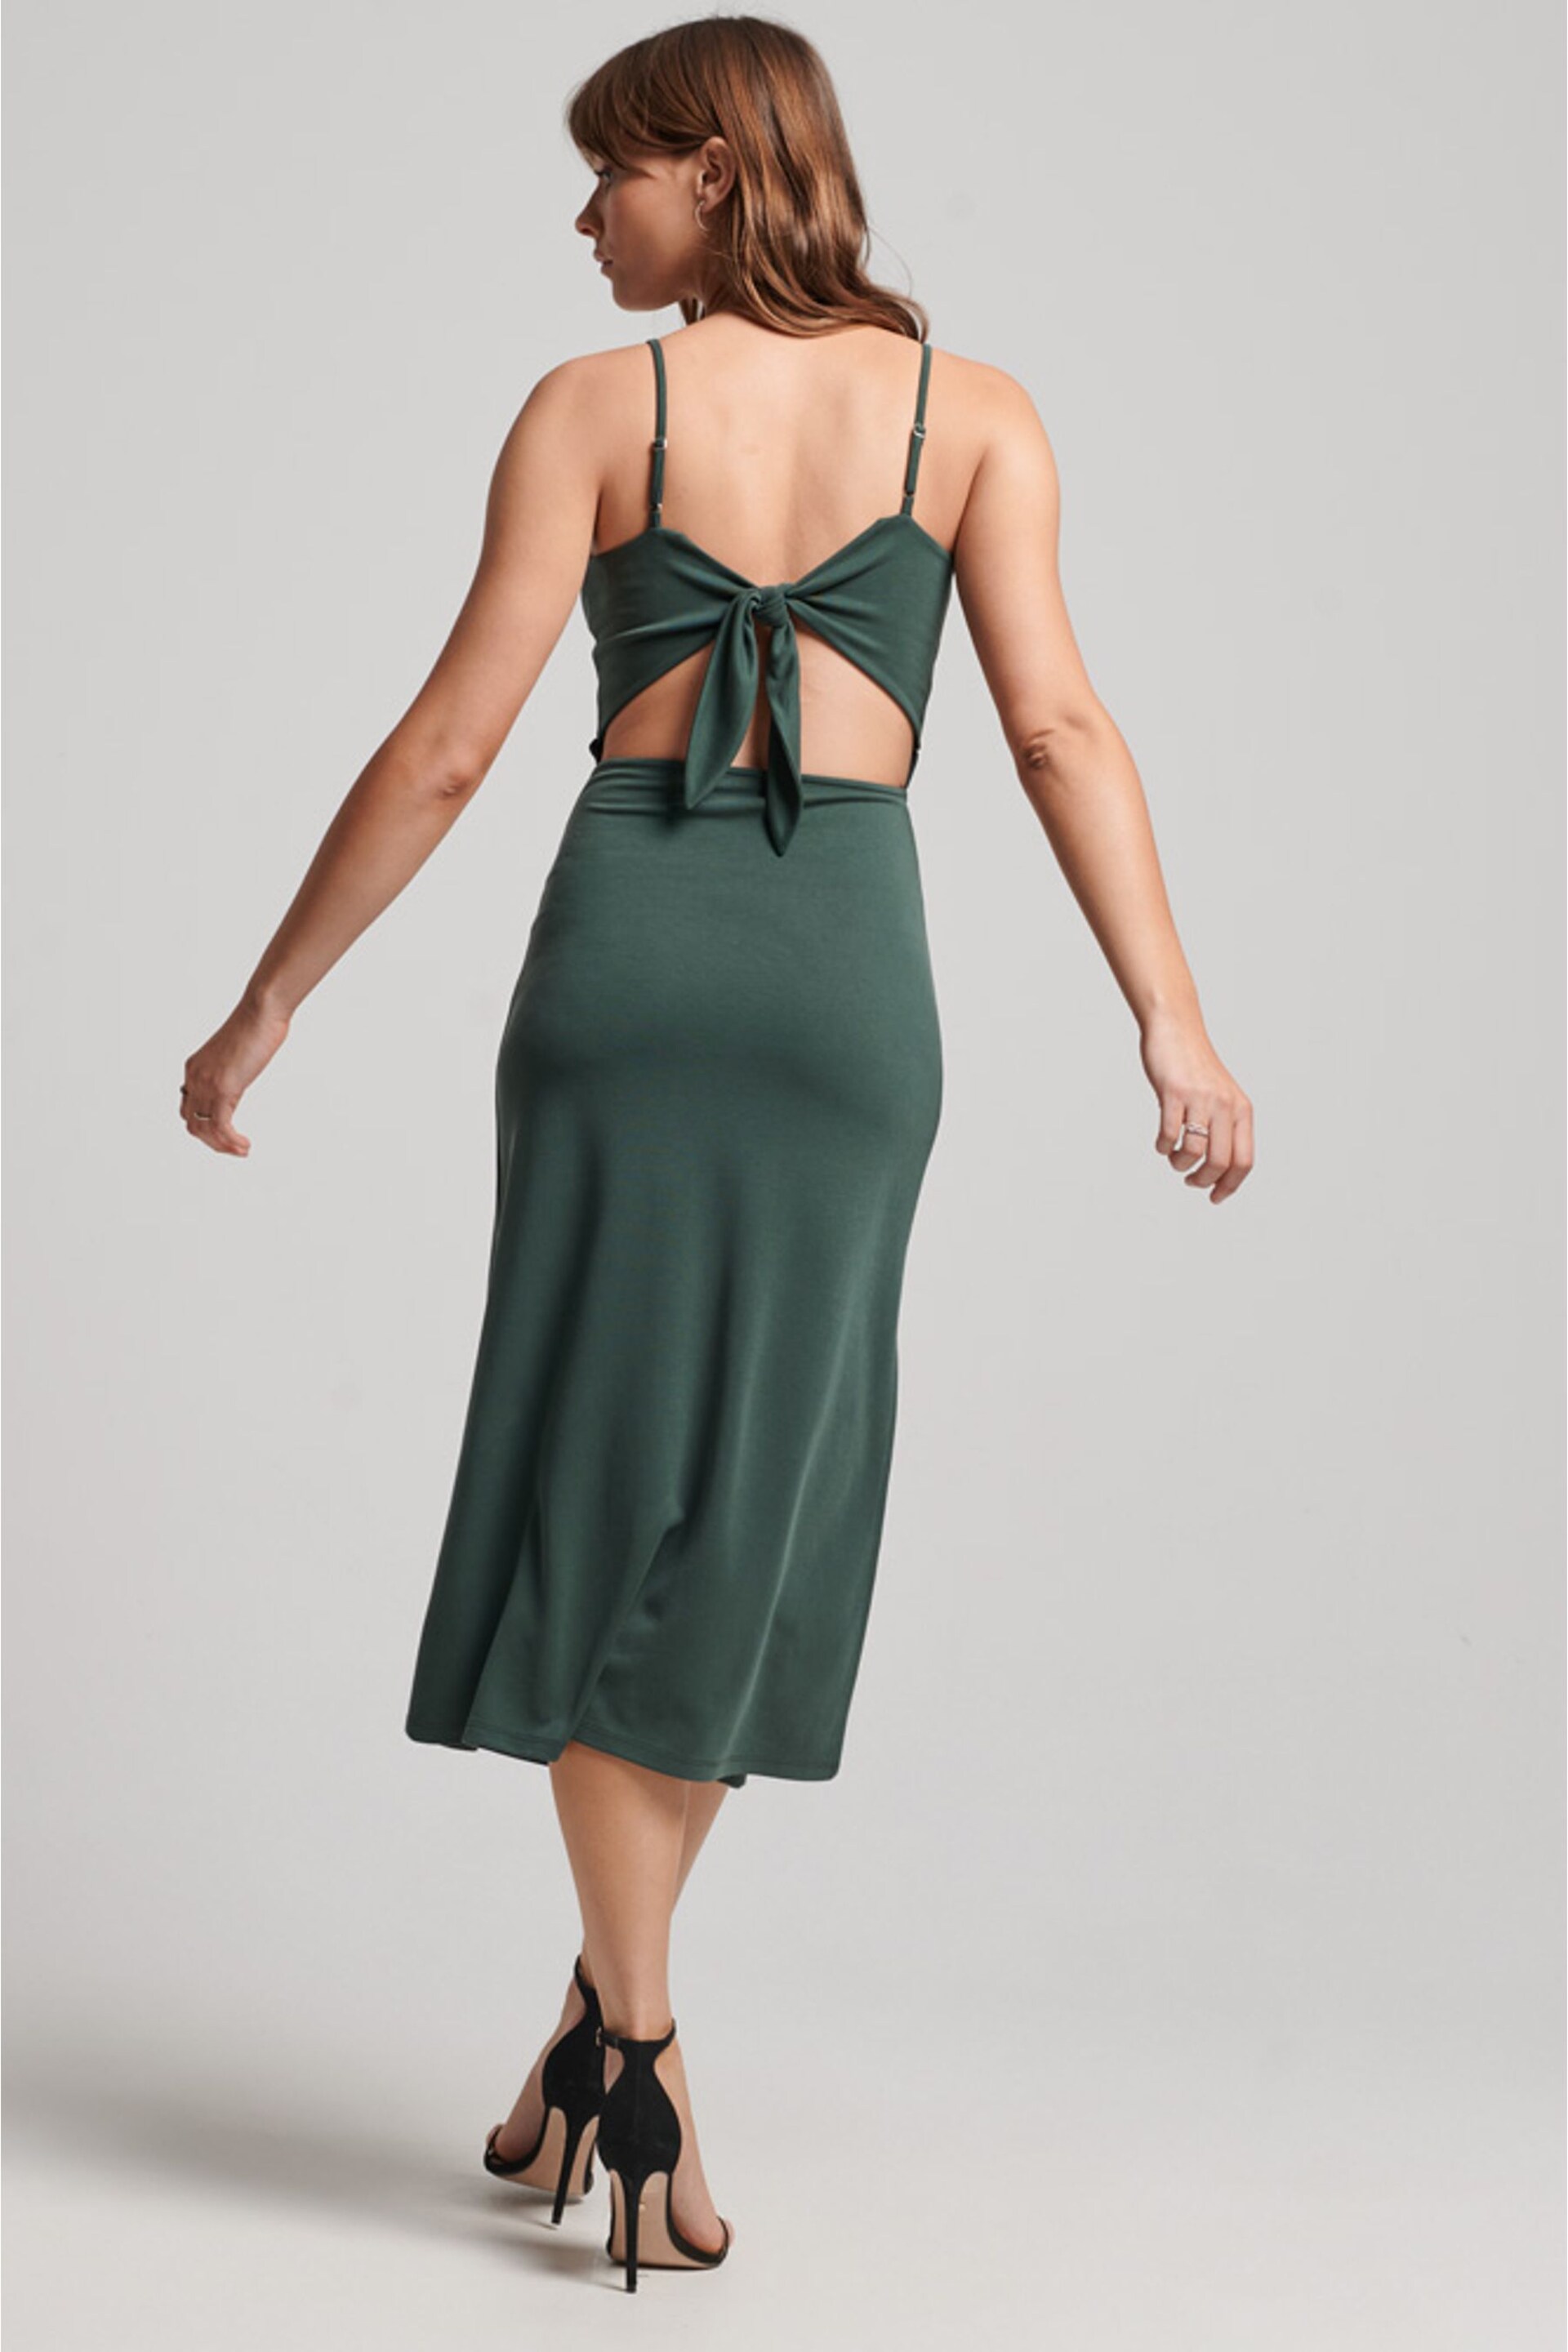 Superdry Green Jersey Open Back Dress - Image 2 of 6